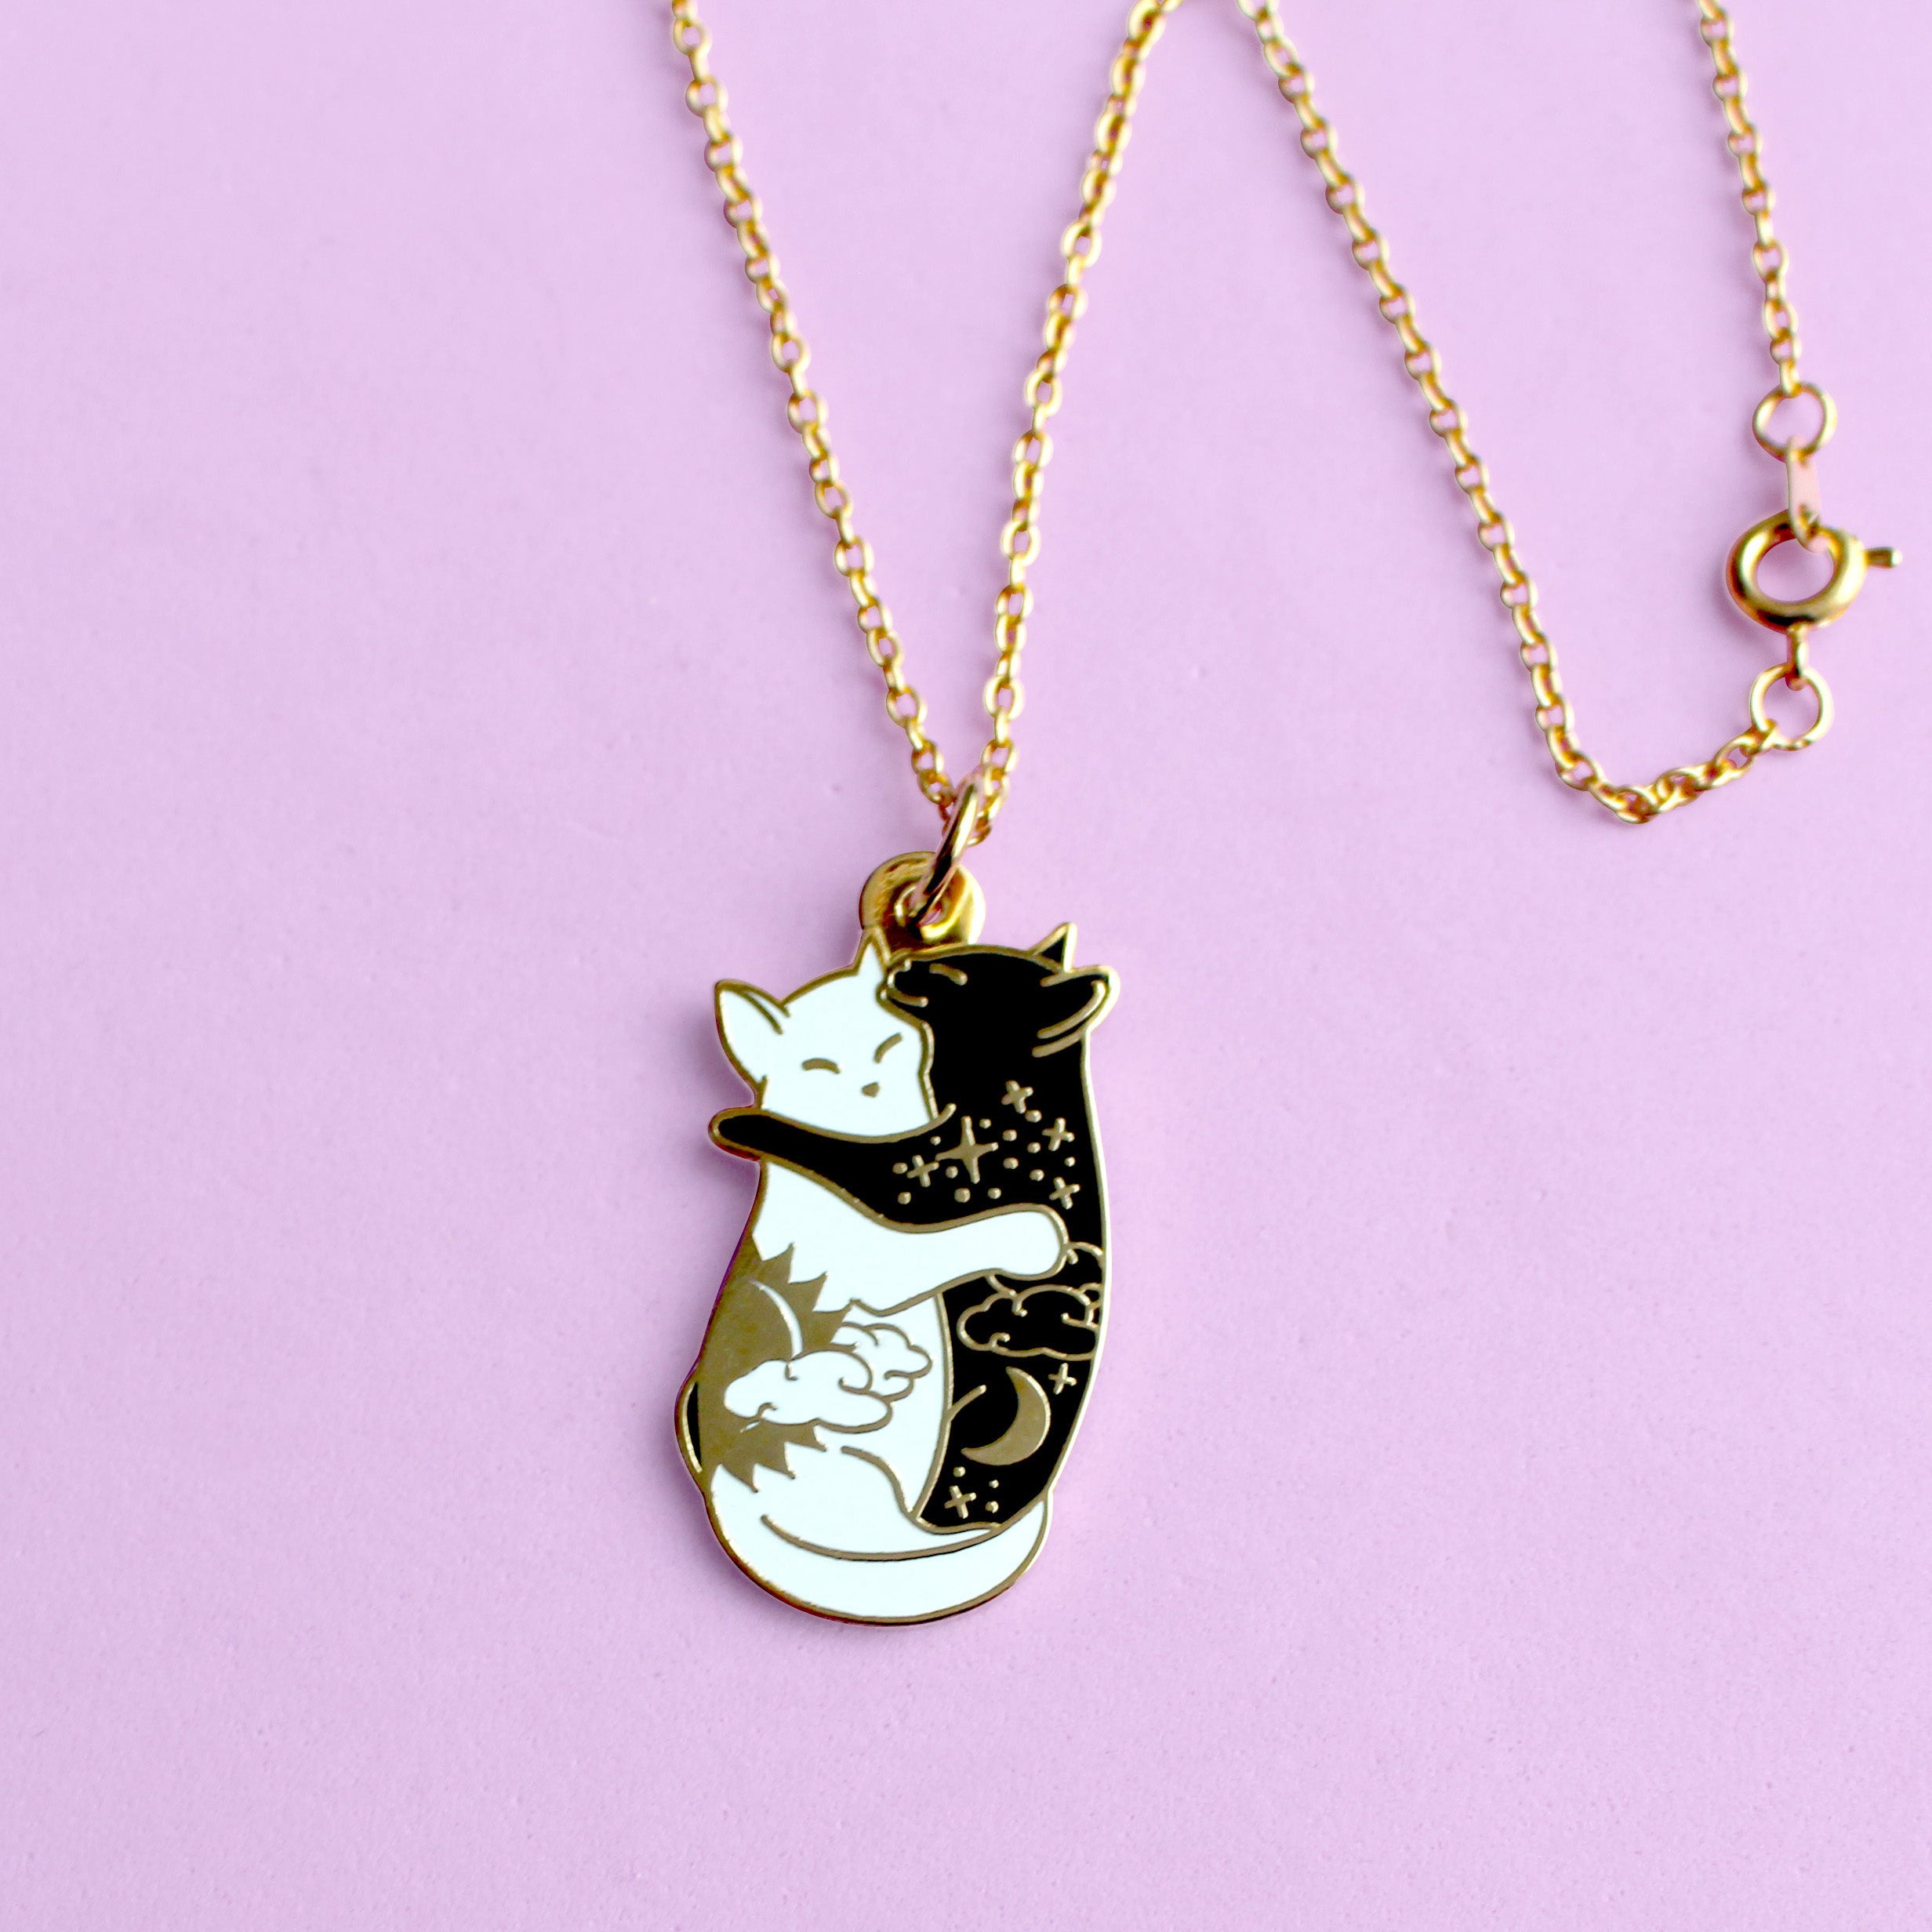 Cat Necklace Tiny Sterling Silver Etched Kitty Necklace Cat Lovers Jewelry  Kitty Lovers Necklace Small Sitting Cat Charm Pet Necklace - Etsy